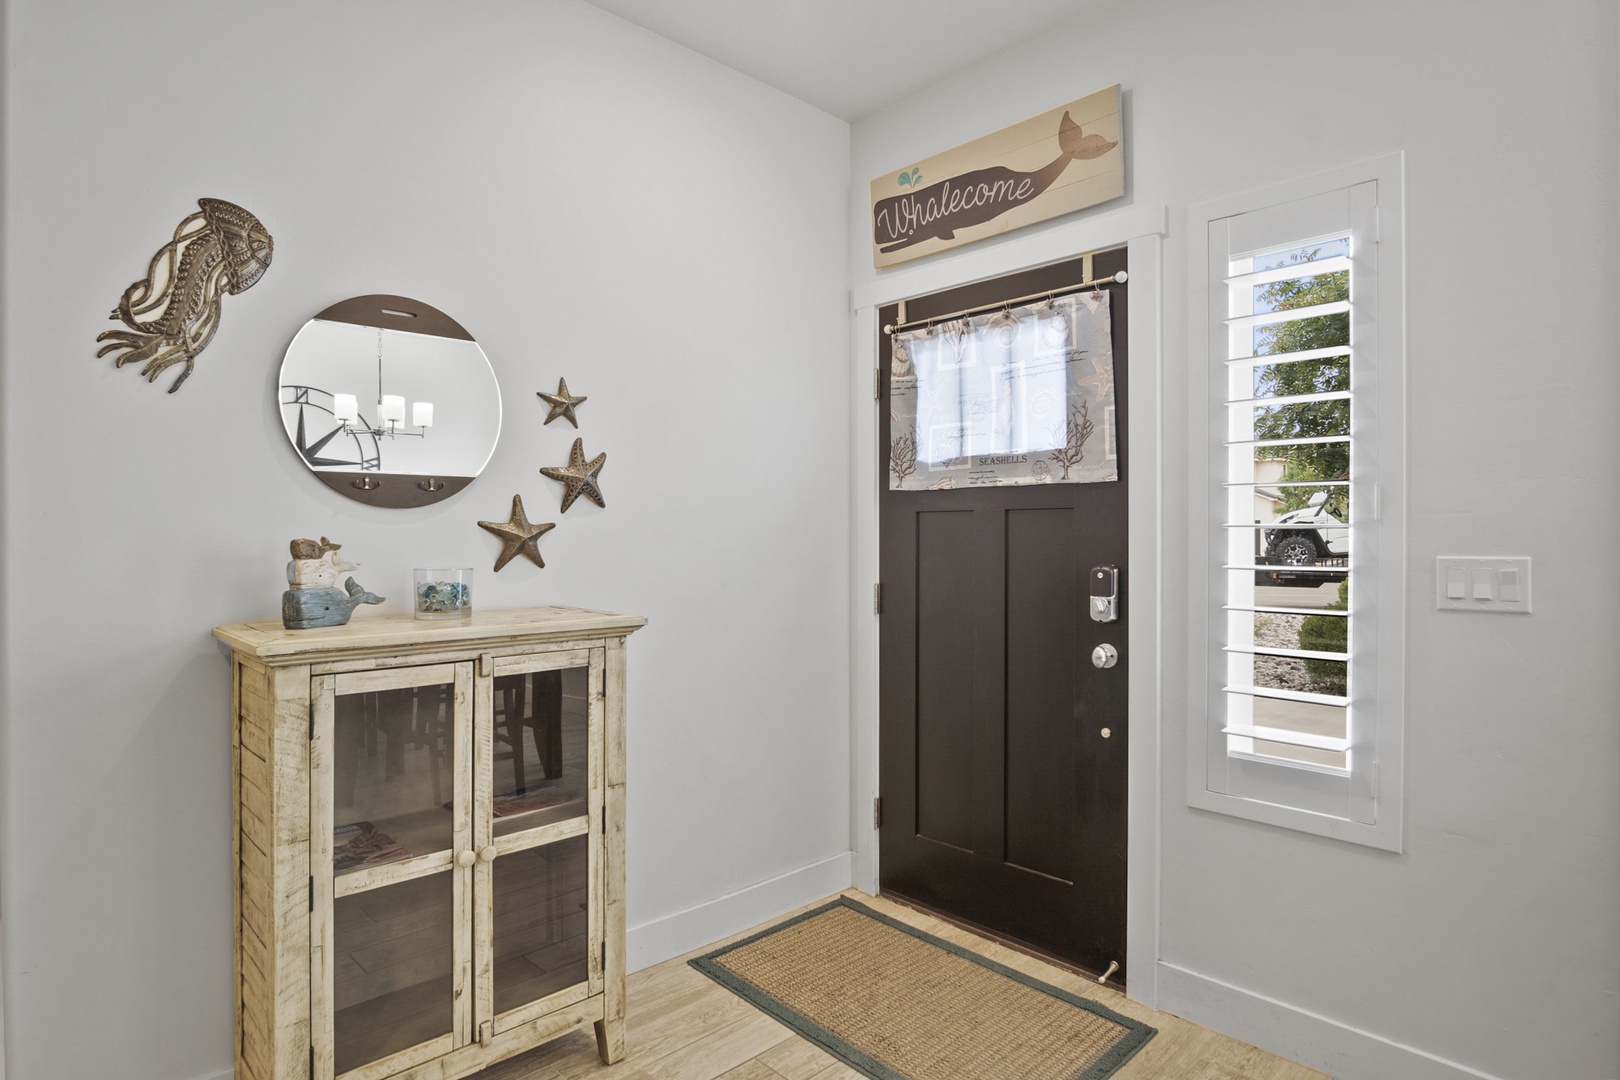 An inviting entryway will welcome you home